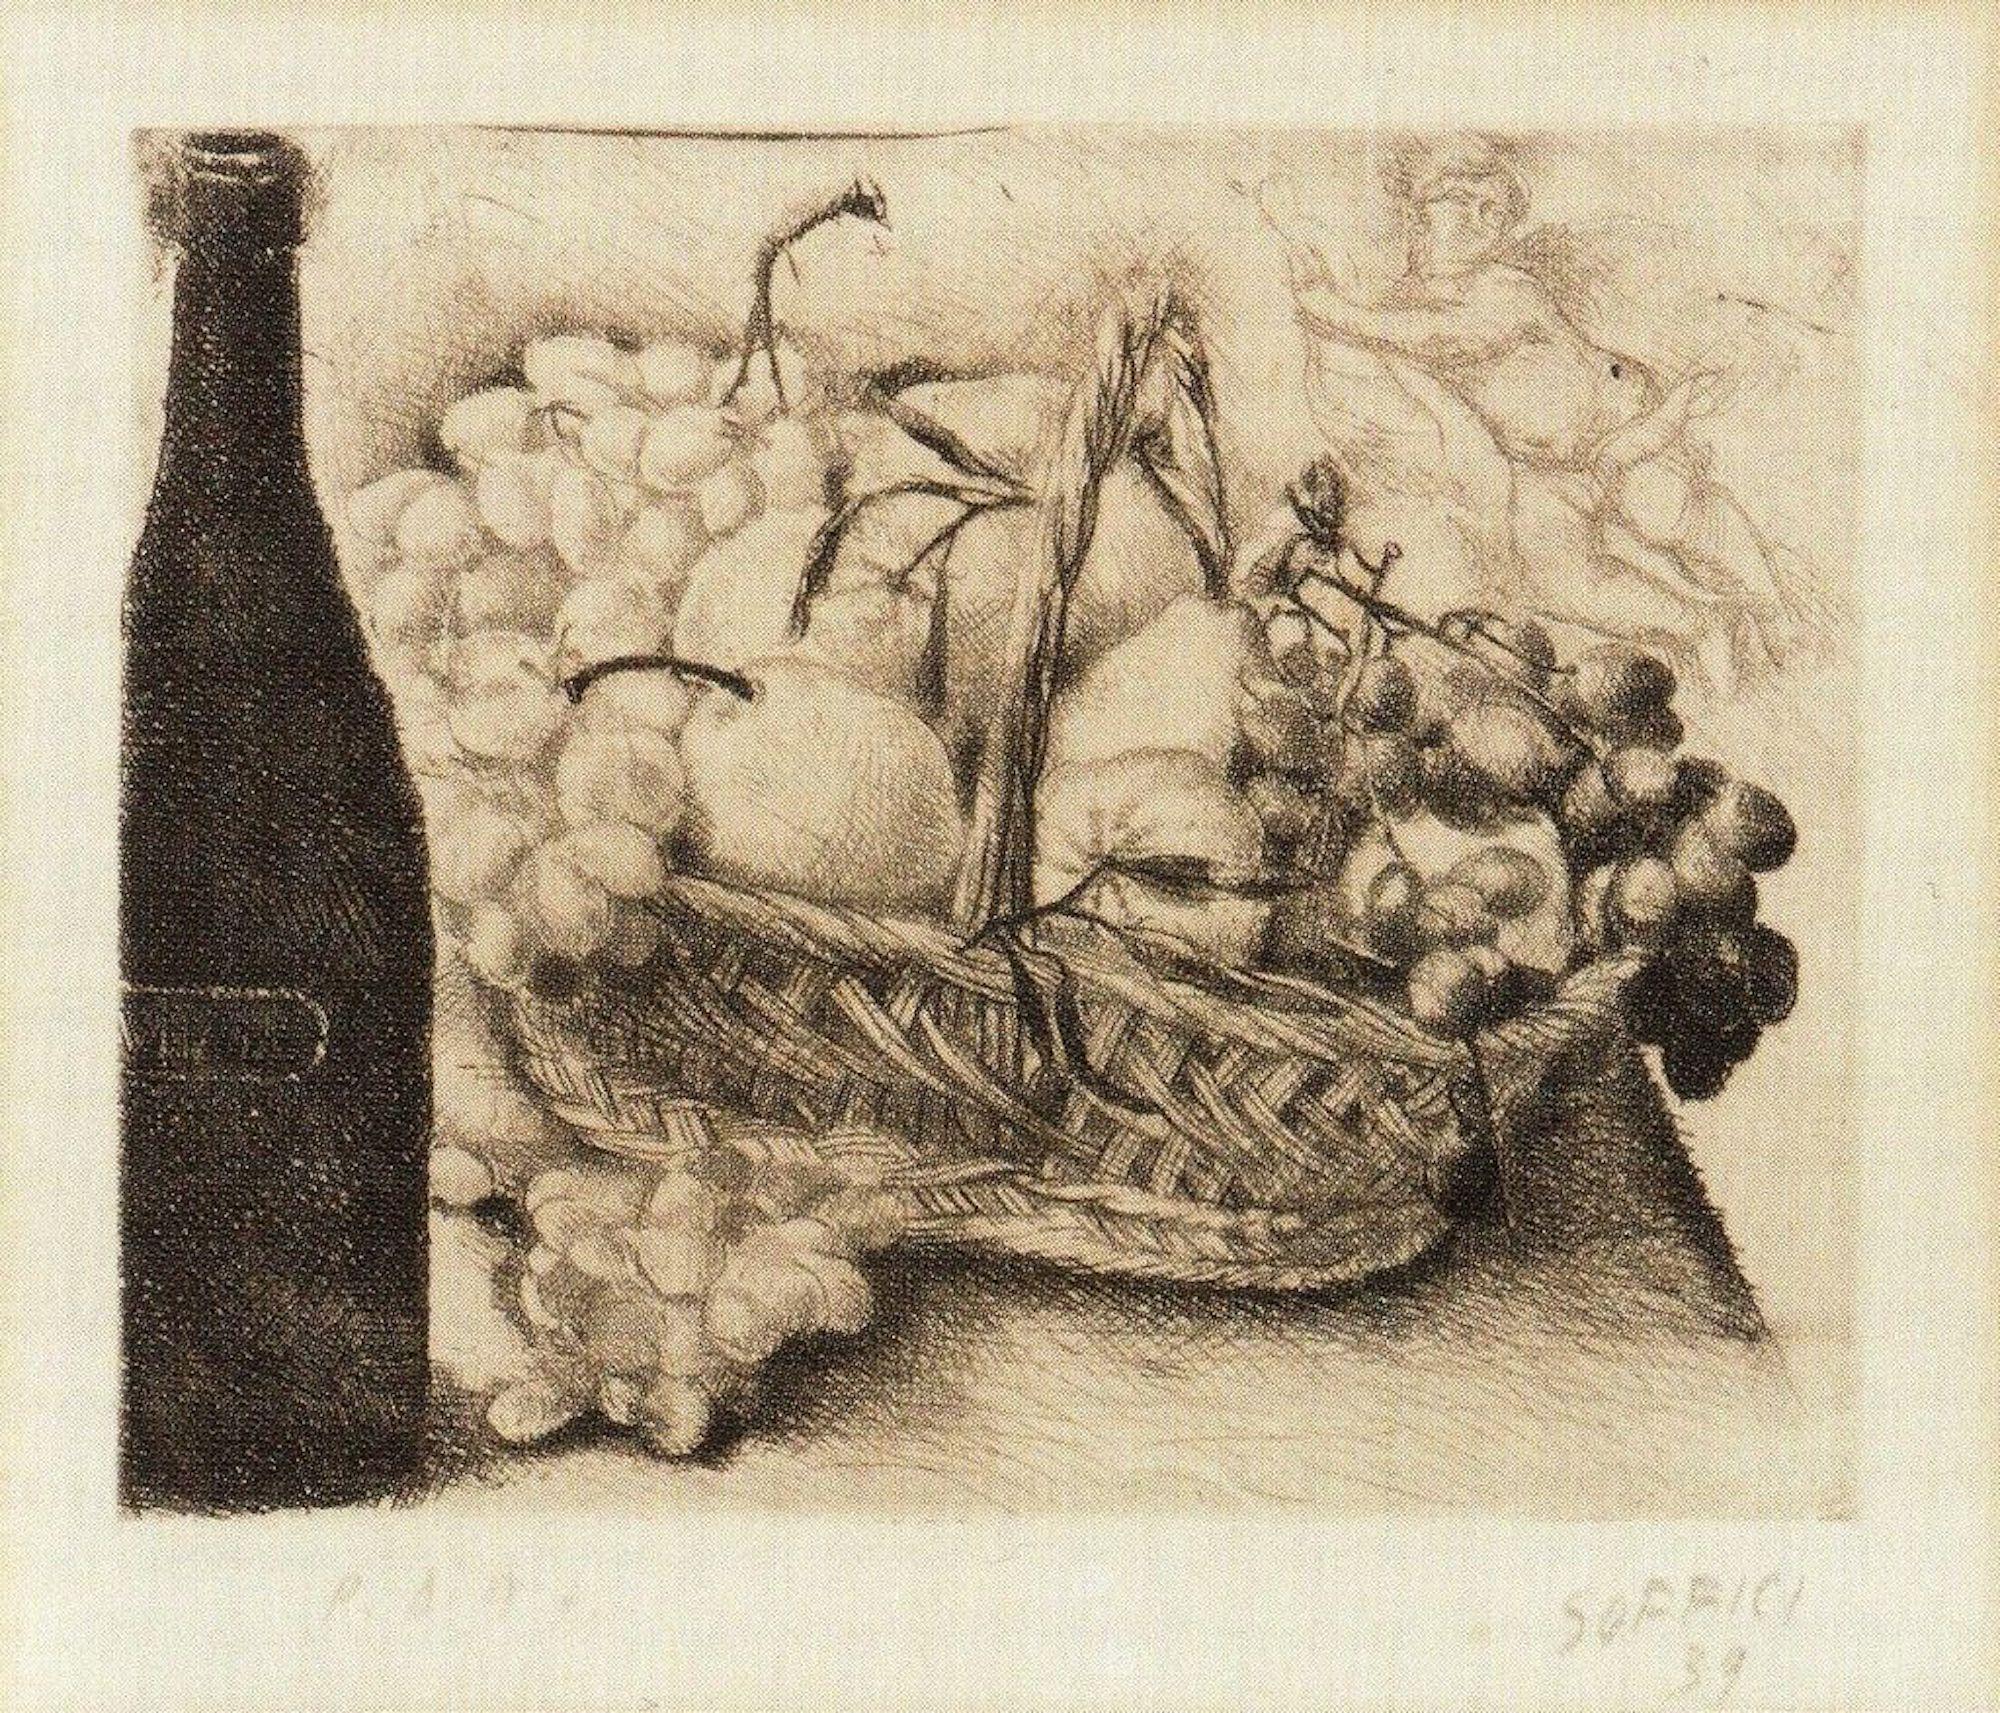 Untitled, Still Life - Original Etching and Drypoint by A. Soffici - 1939